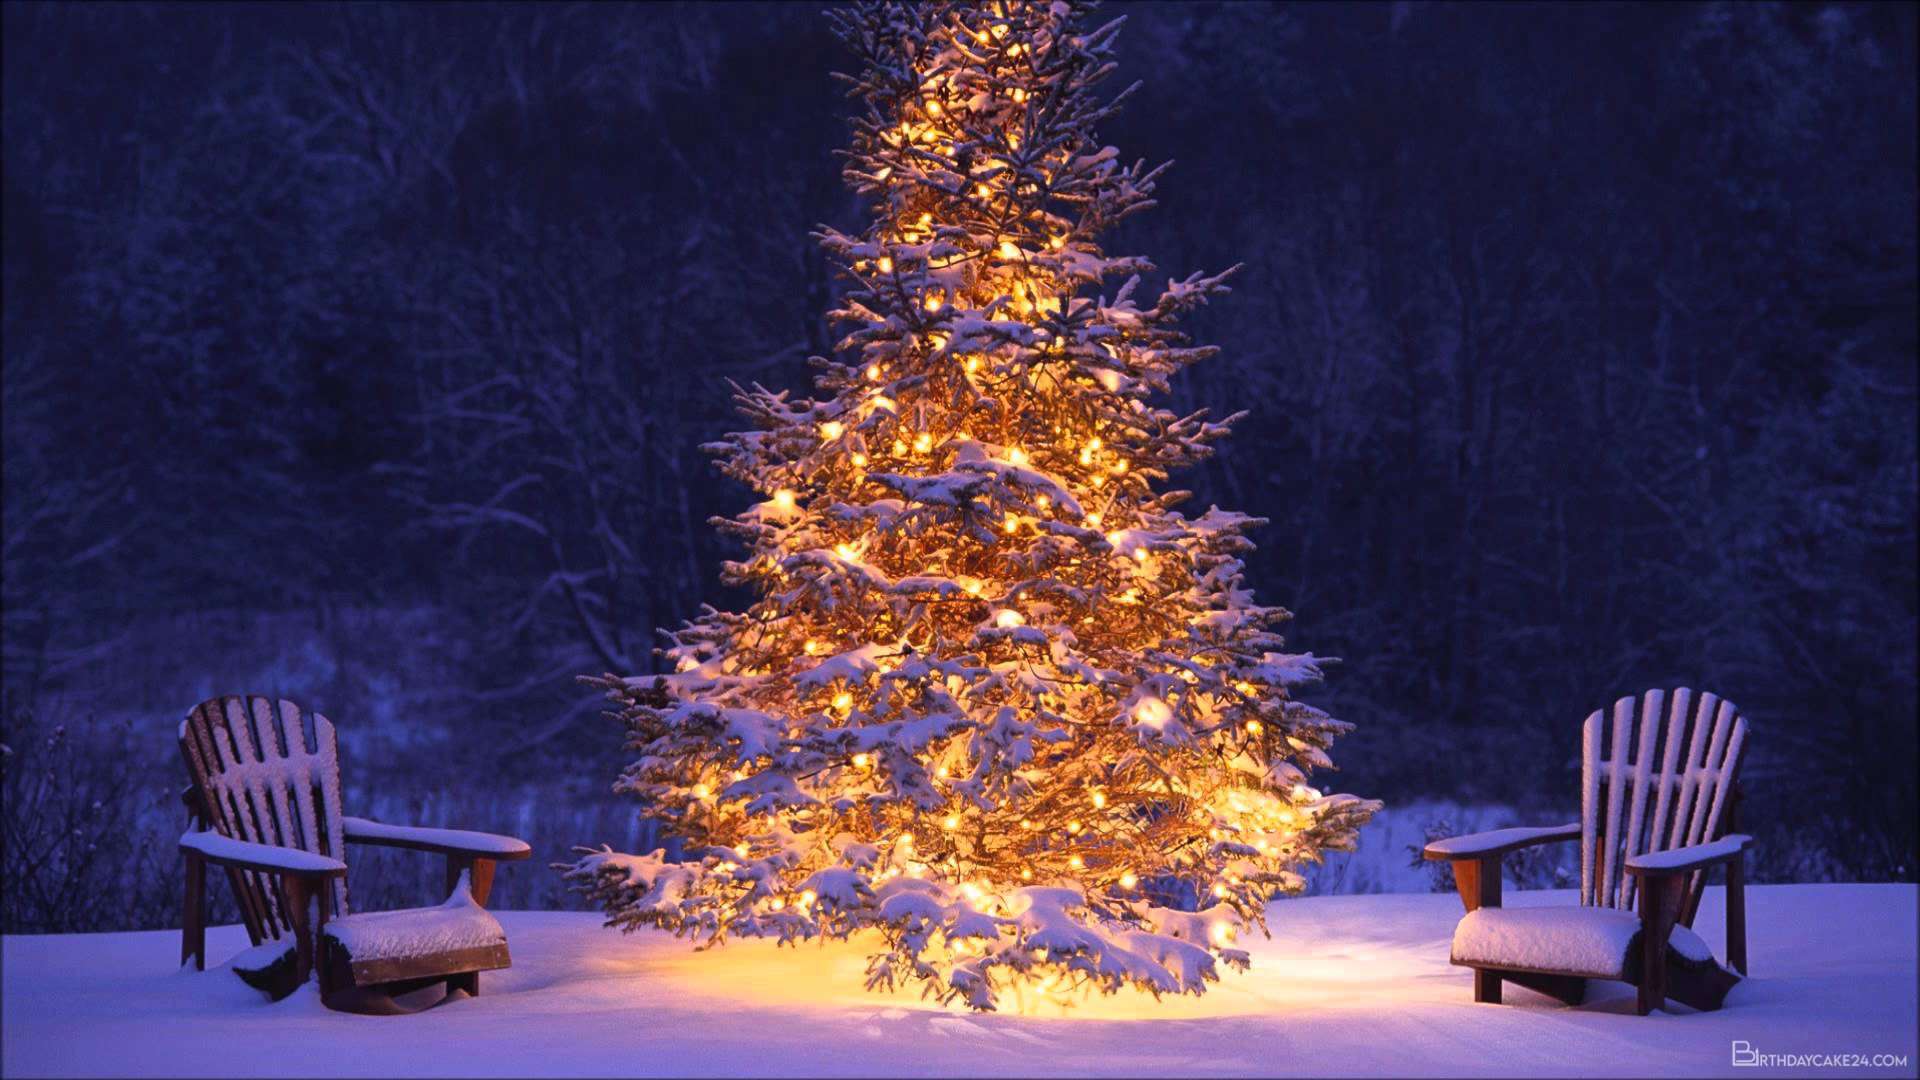 Background Merry Christmas Wallpaper Download 2021 Full HD